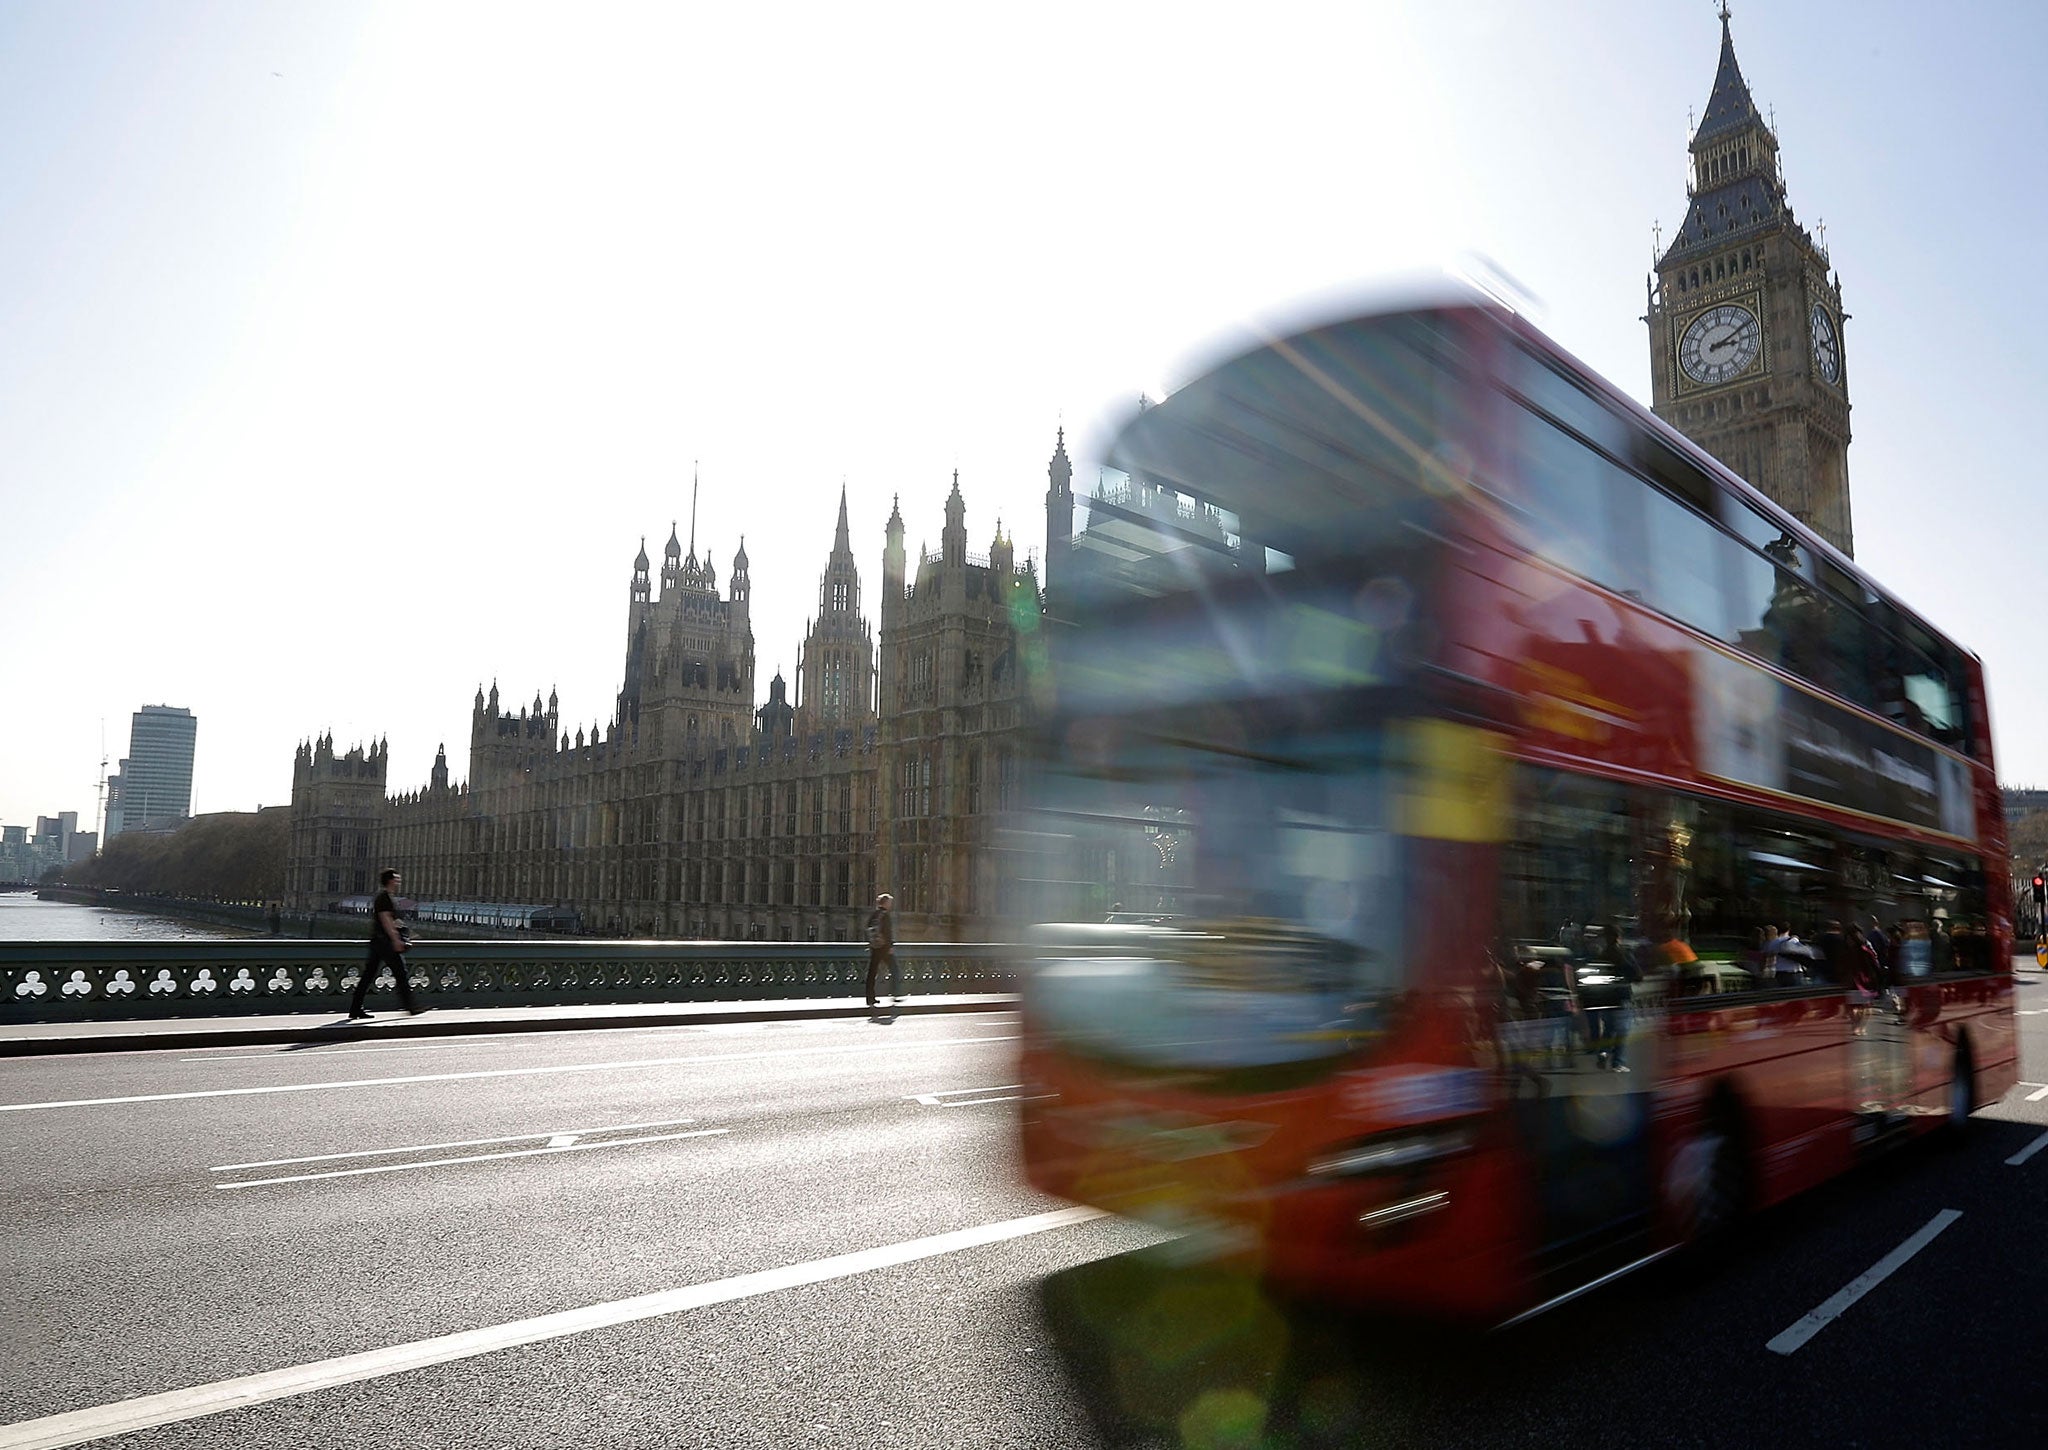 A London bus travels over Westminster Bridge in front of the Houses of Parliament on March 28, 2012 in London, England.